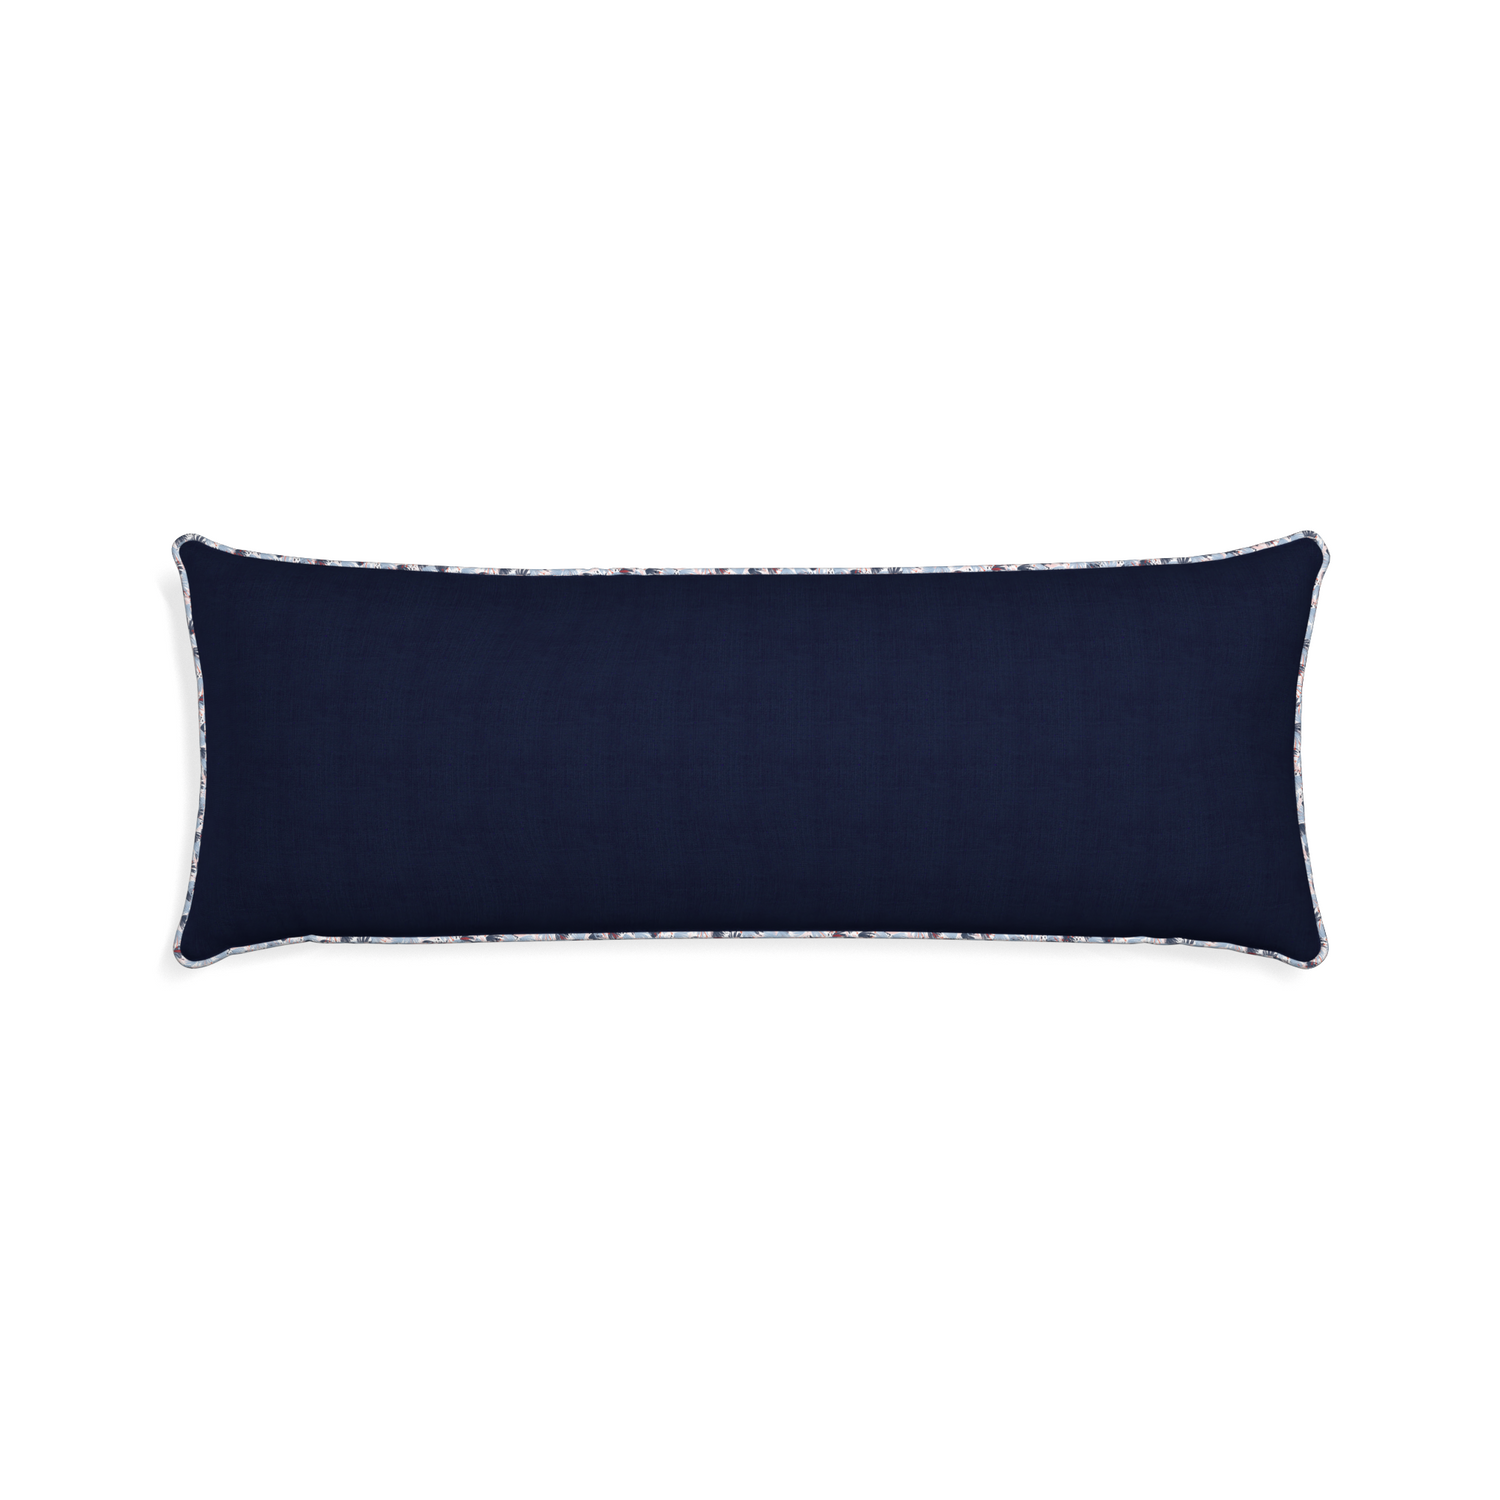 Xl-lumbar midnight custom navy bluepillow with e piping on white background